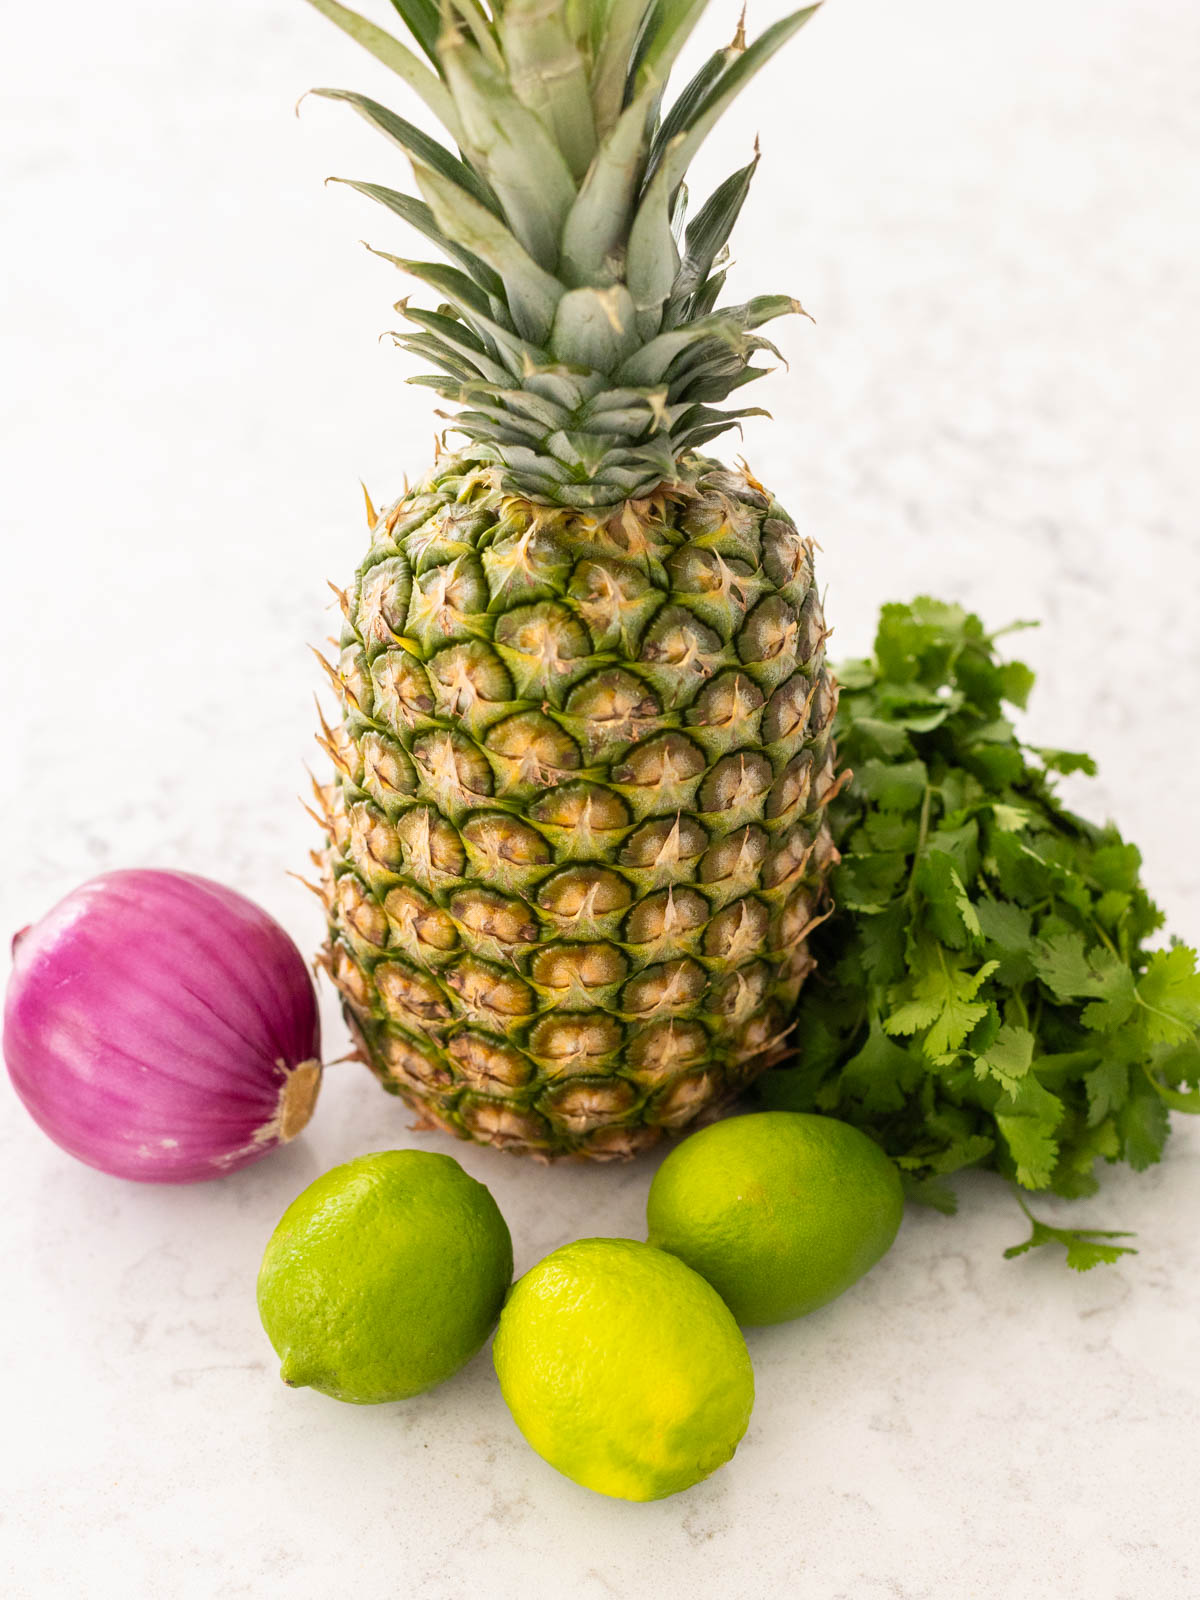 The fresh pineapple, limes, red onion, and cilantro are on the counter.